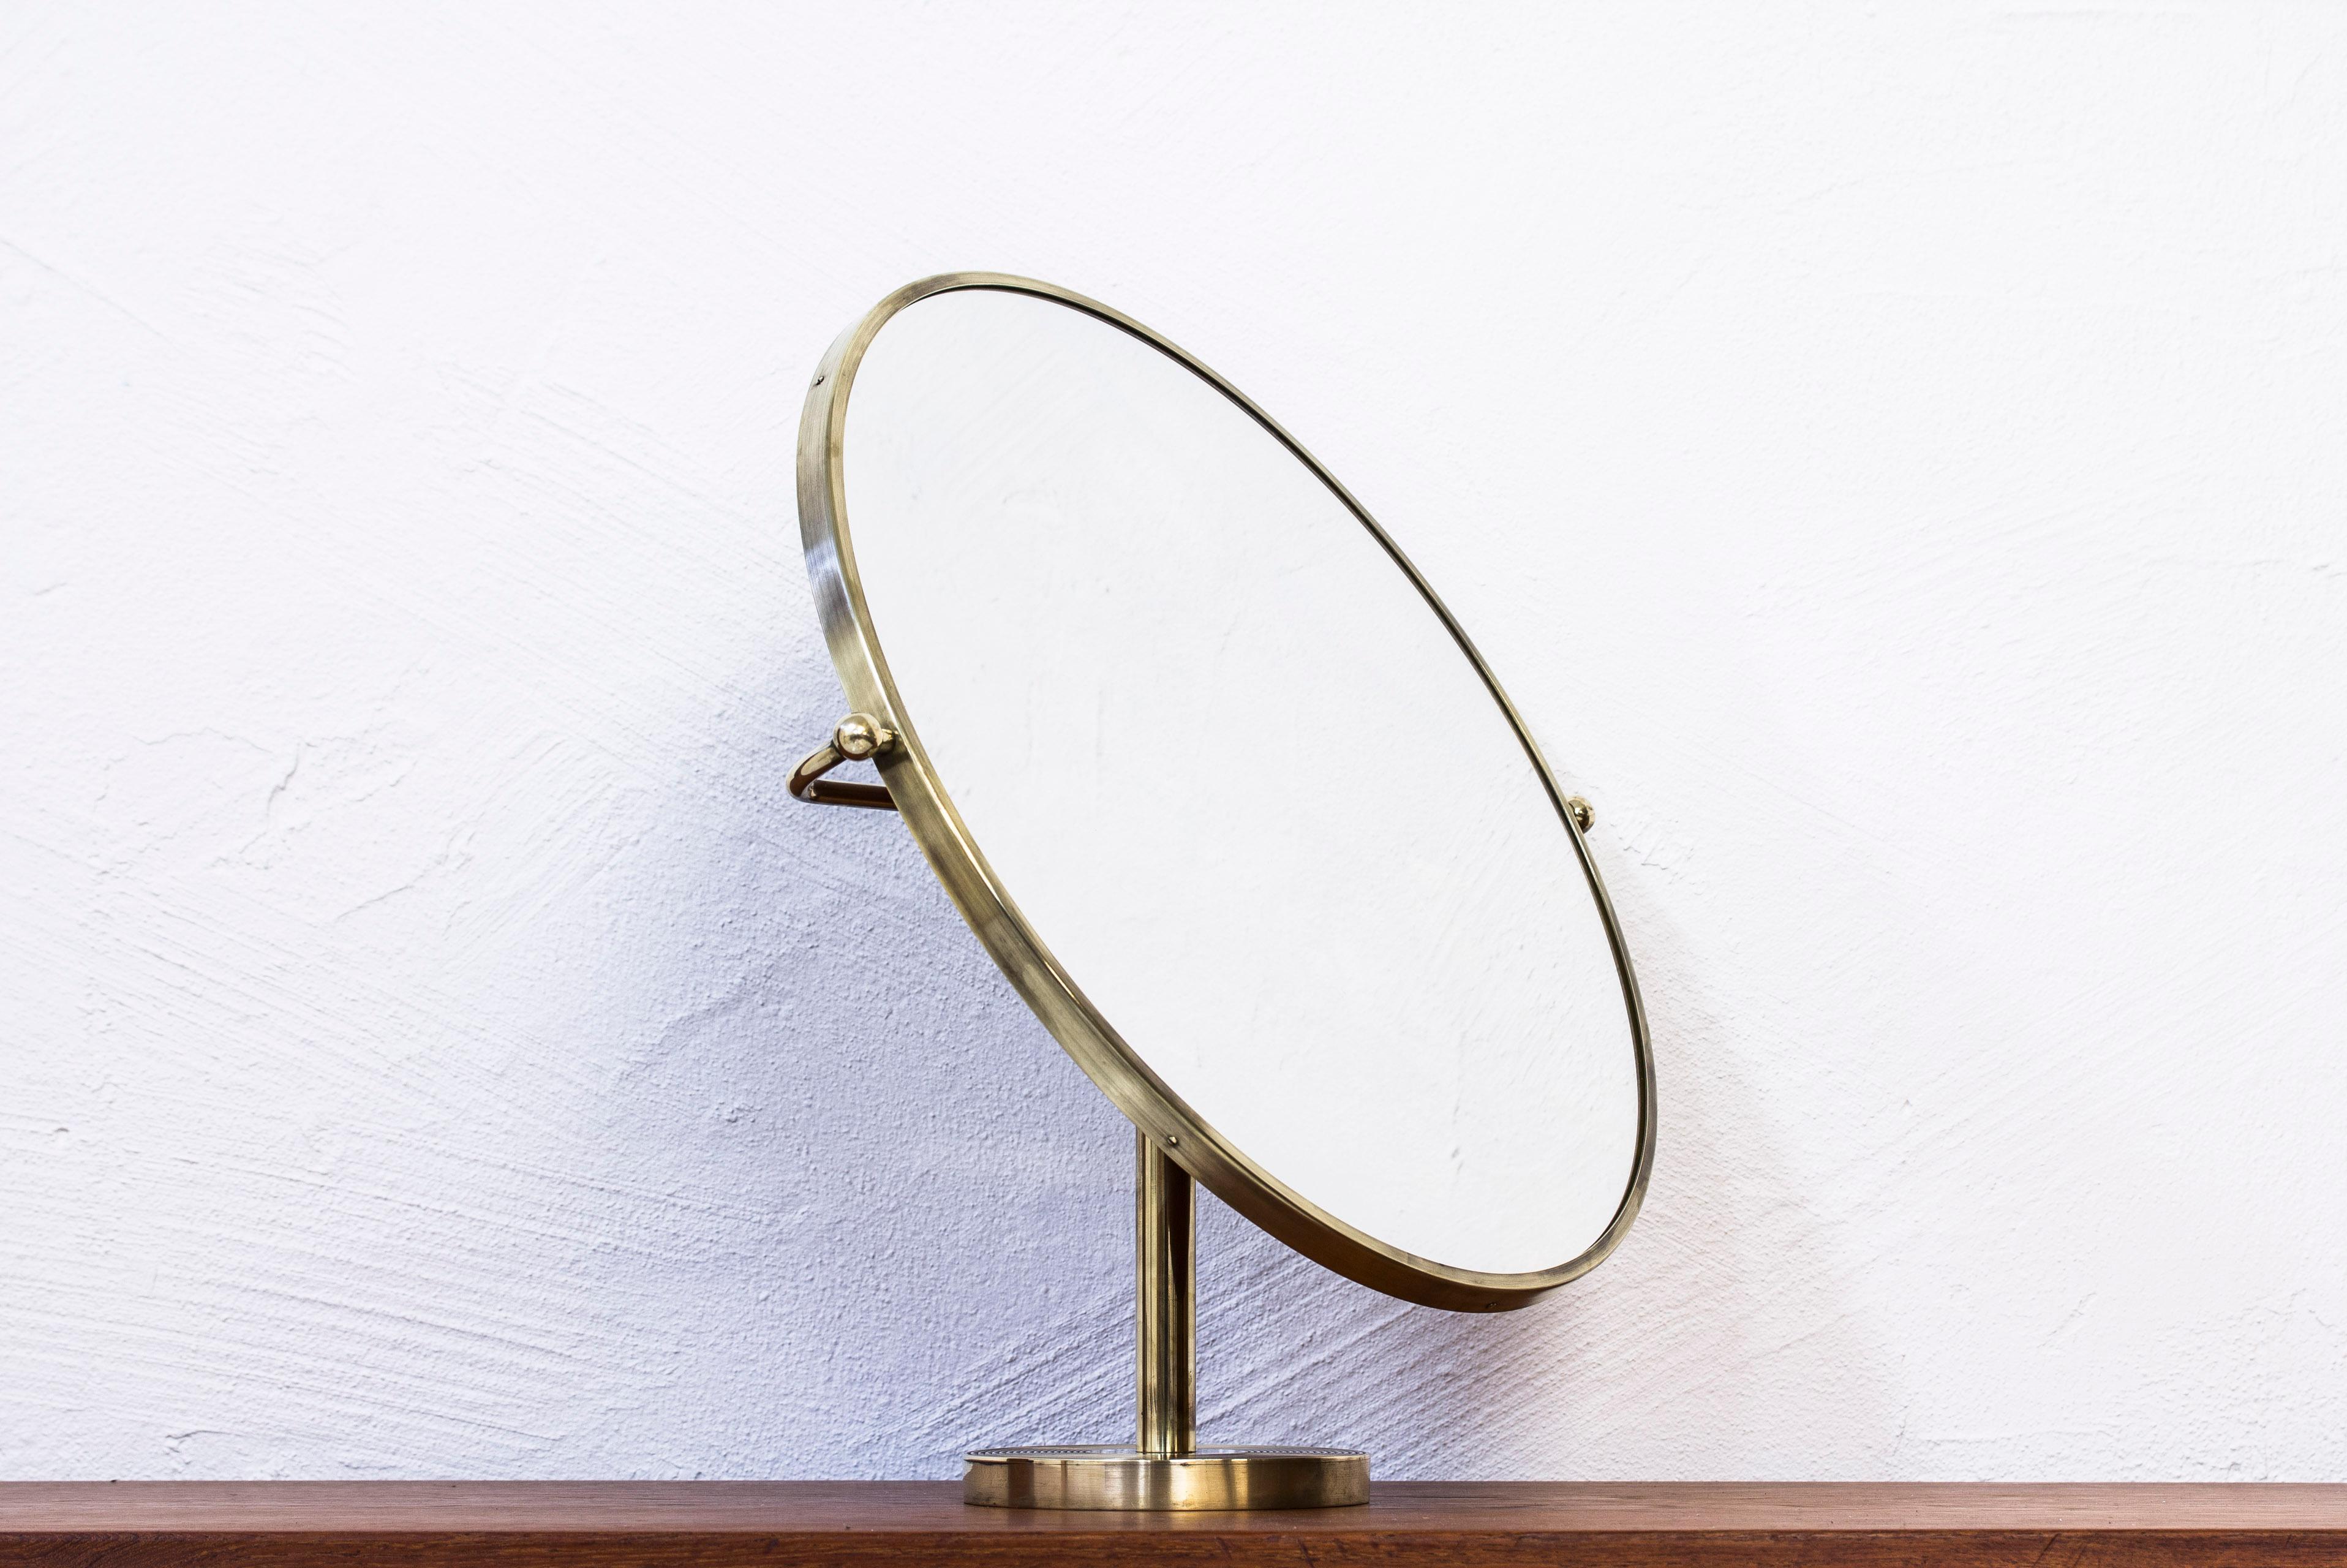 Vanity mirror model no 2214 designed by Josef Frank. Produced in Sweden by Firma Svenskt Tenn. Designed in 1934, this example, circa 1940s-1950s. Made from solid brass with mahogny wooden back part. Adjustable in angle. Very good condition with